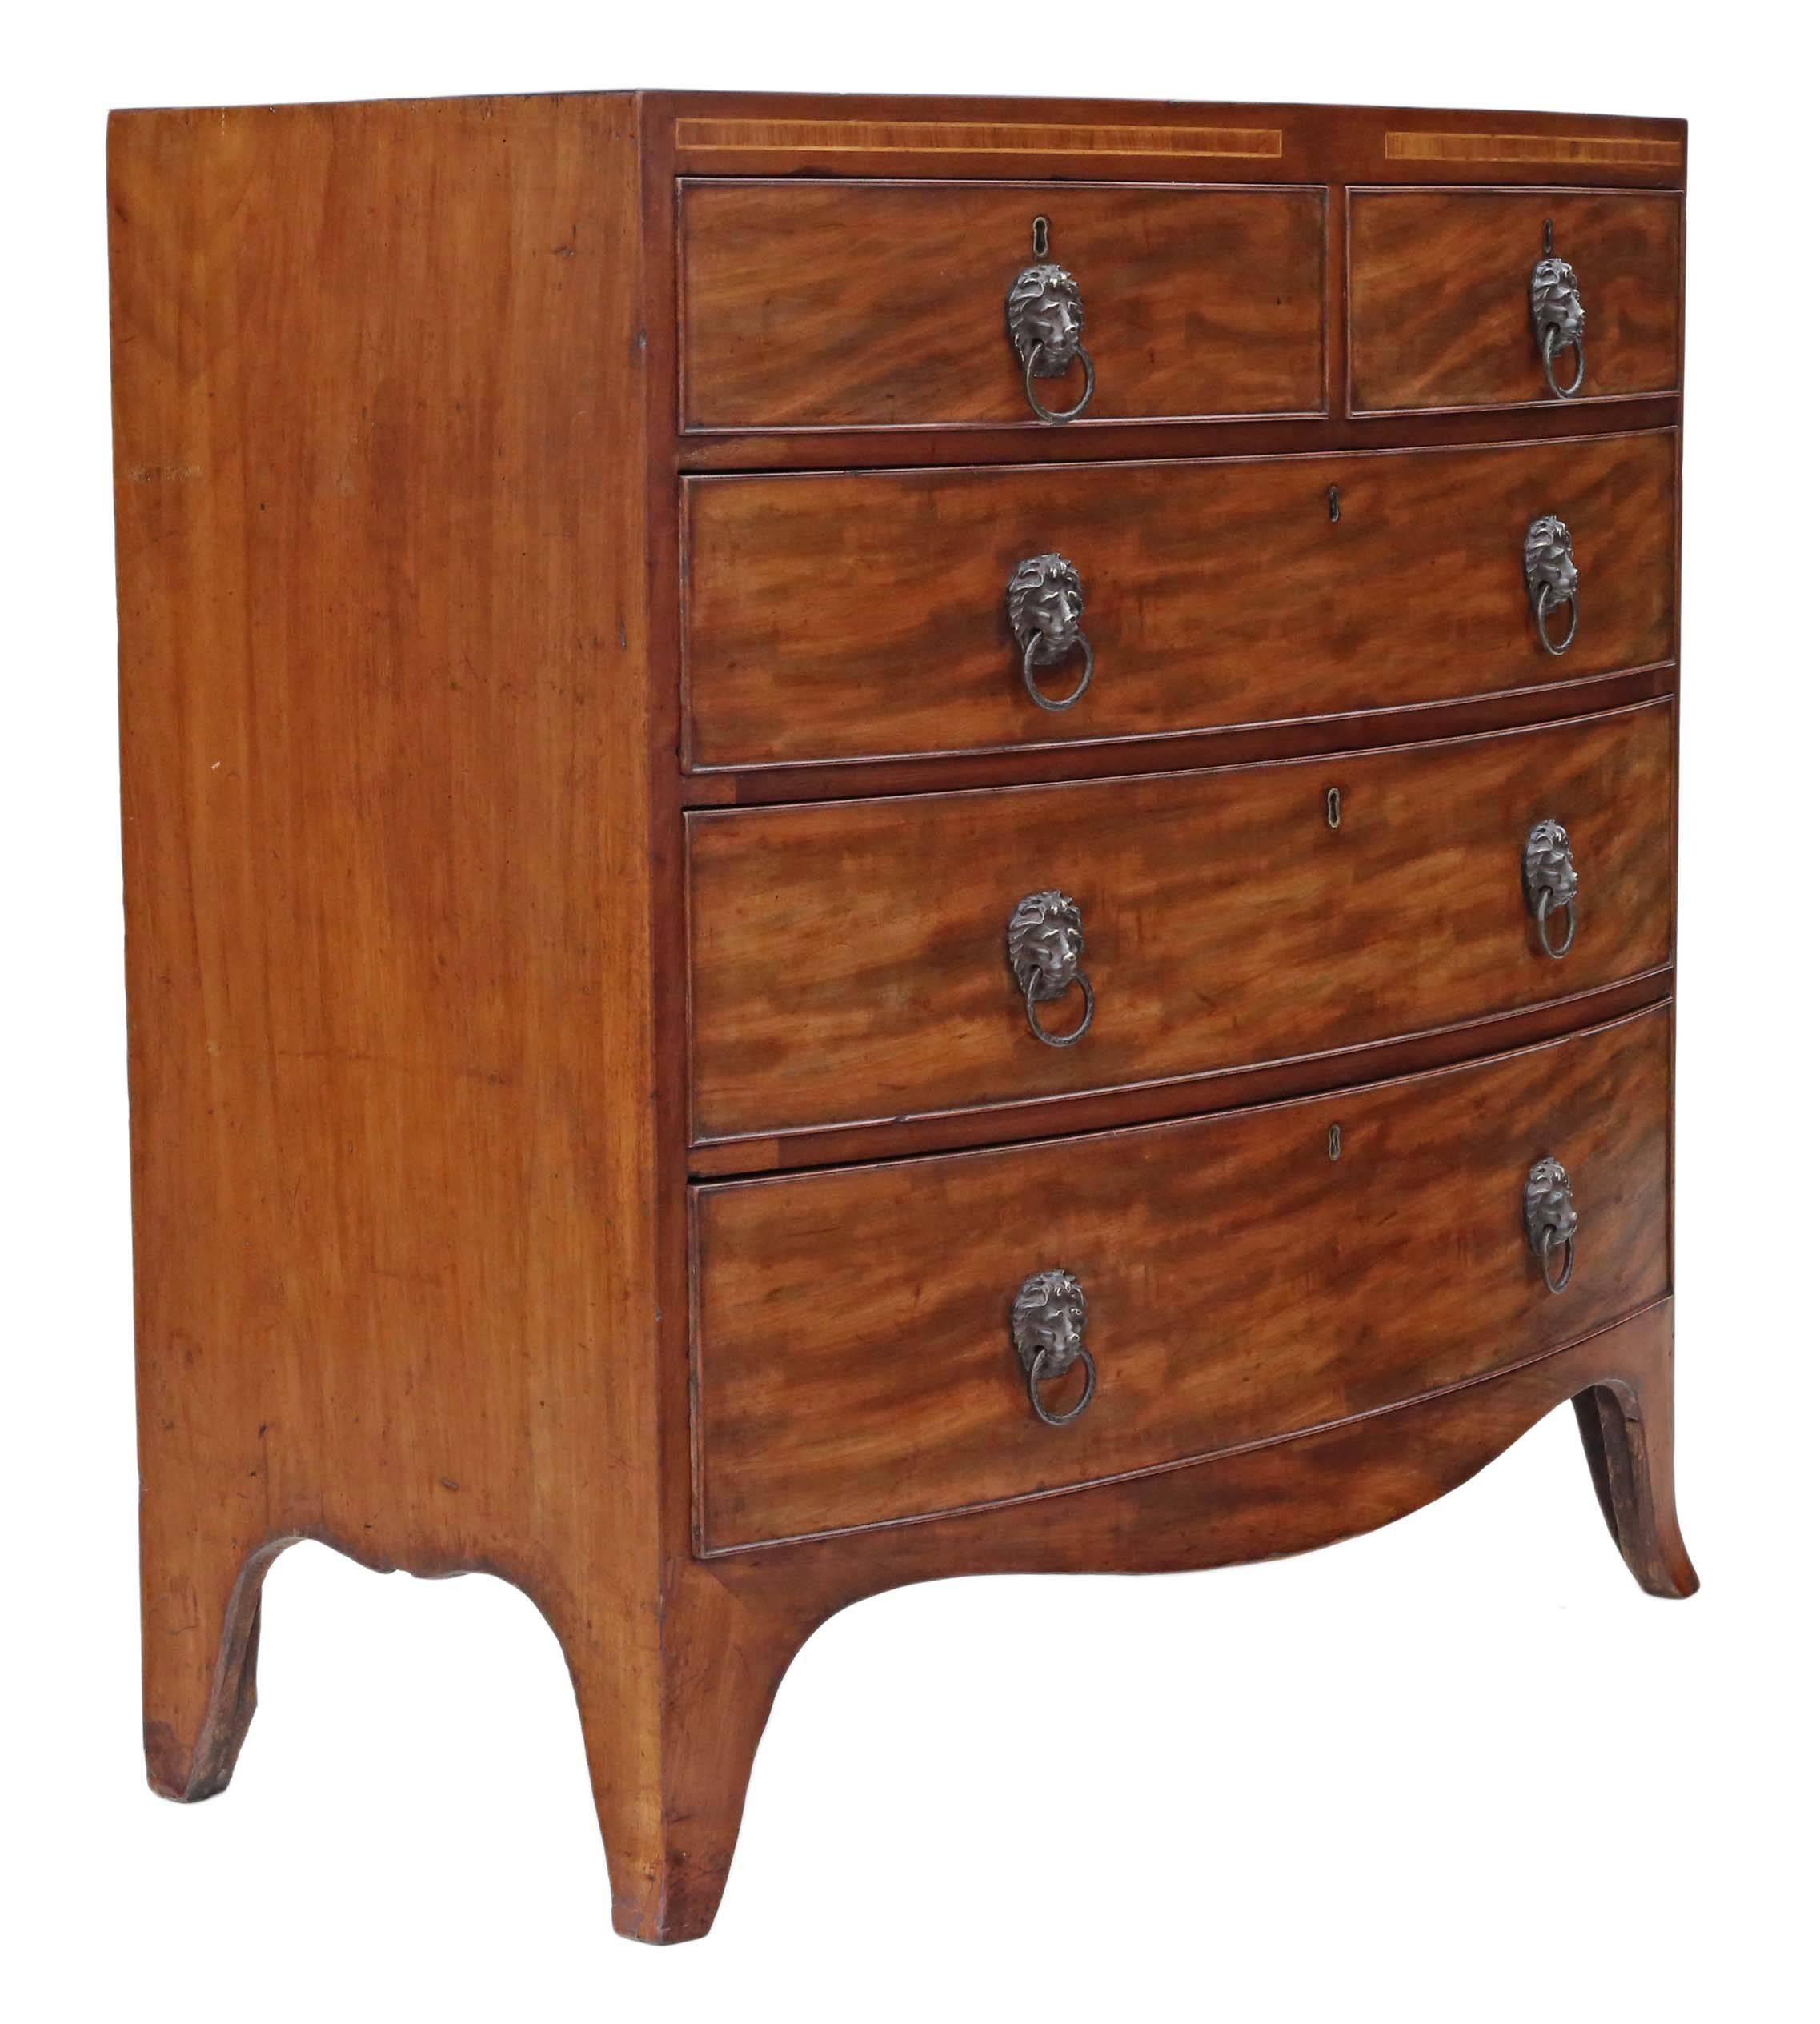 Early 19th Century Antique Quality Regency Bow Front Flame Mahogany Chest of Drawers, circa 1820